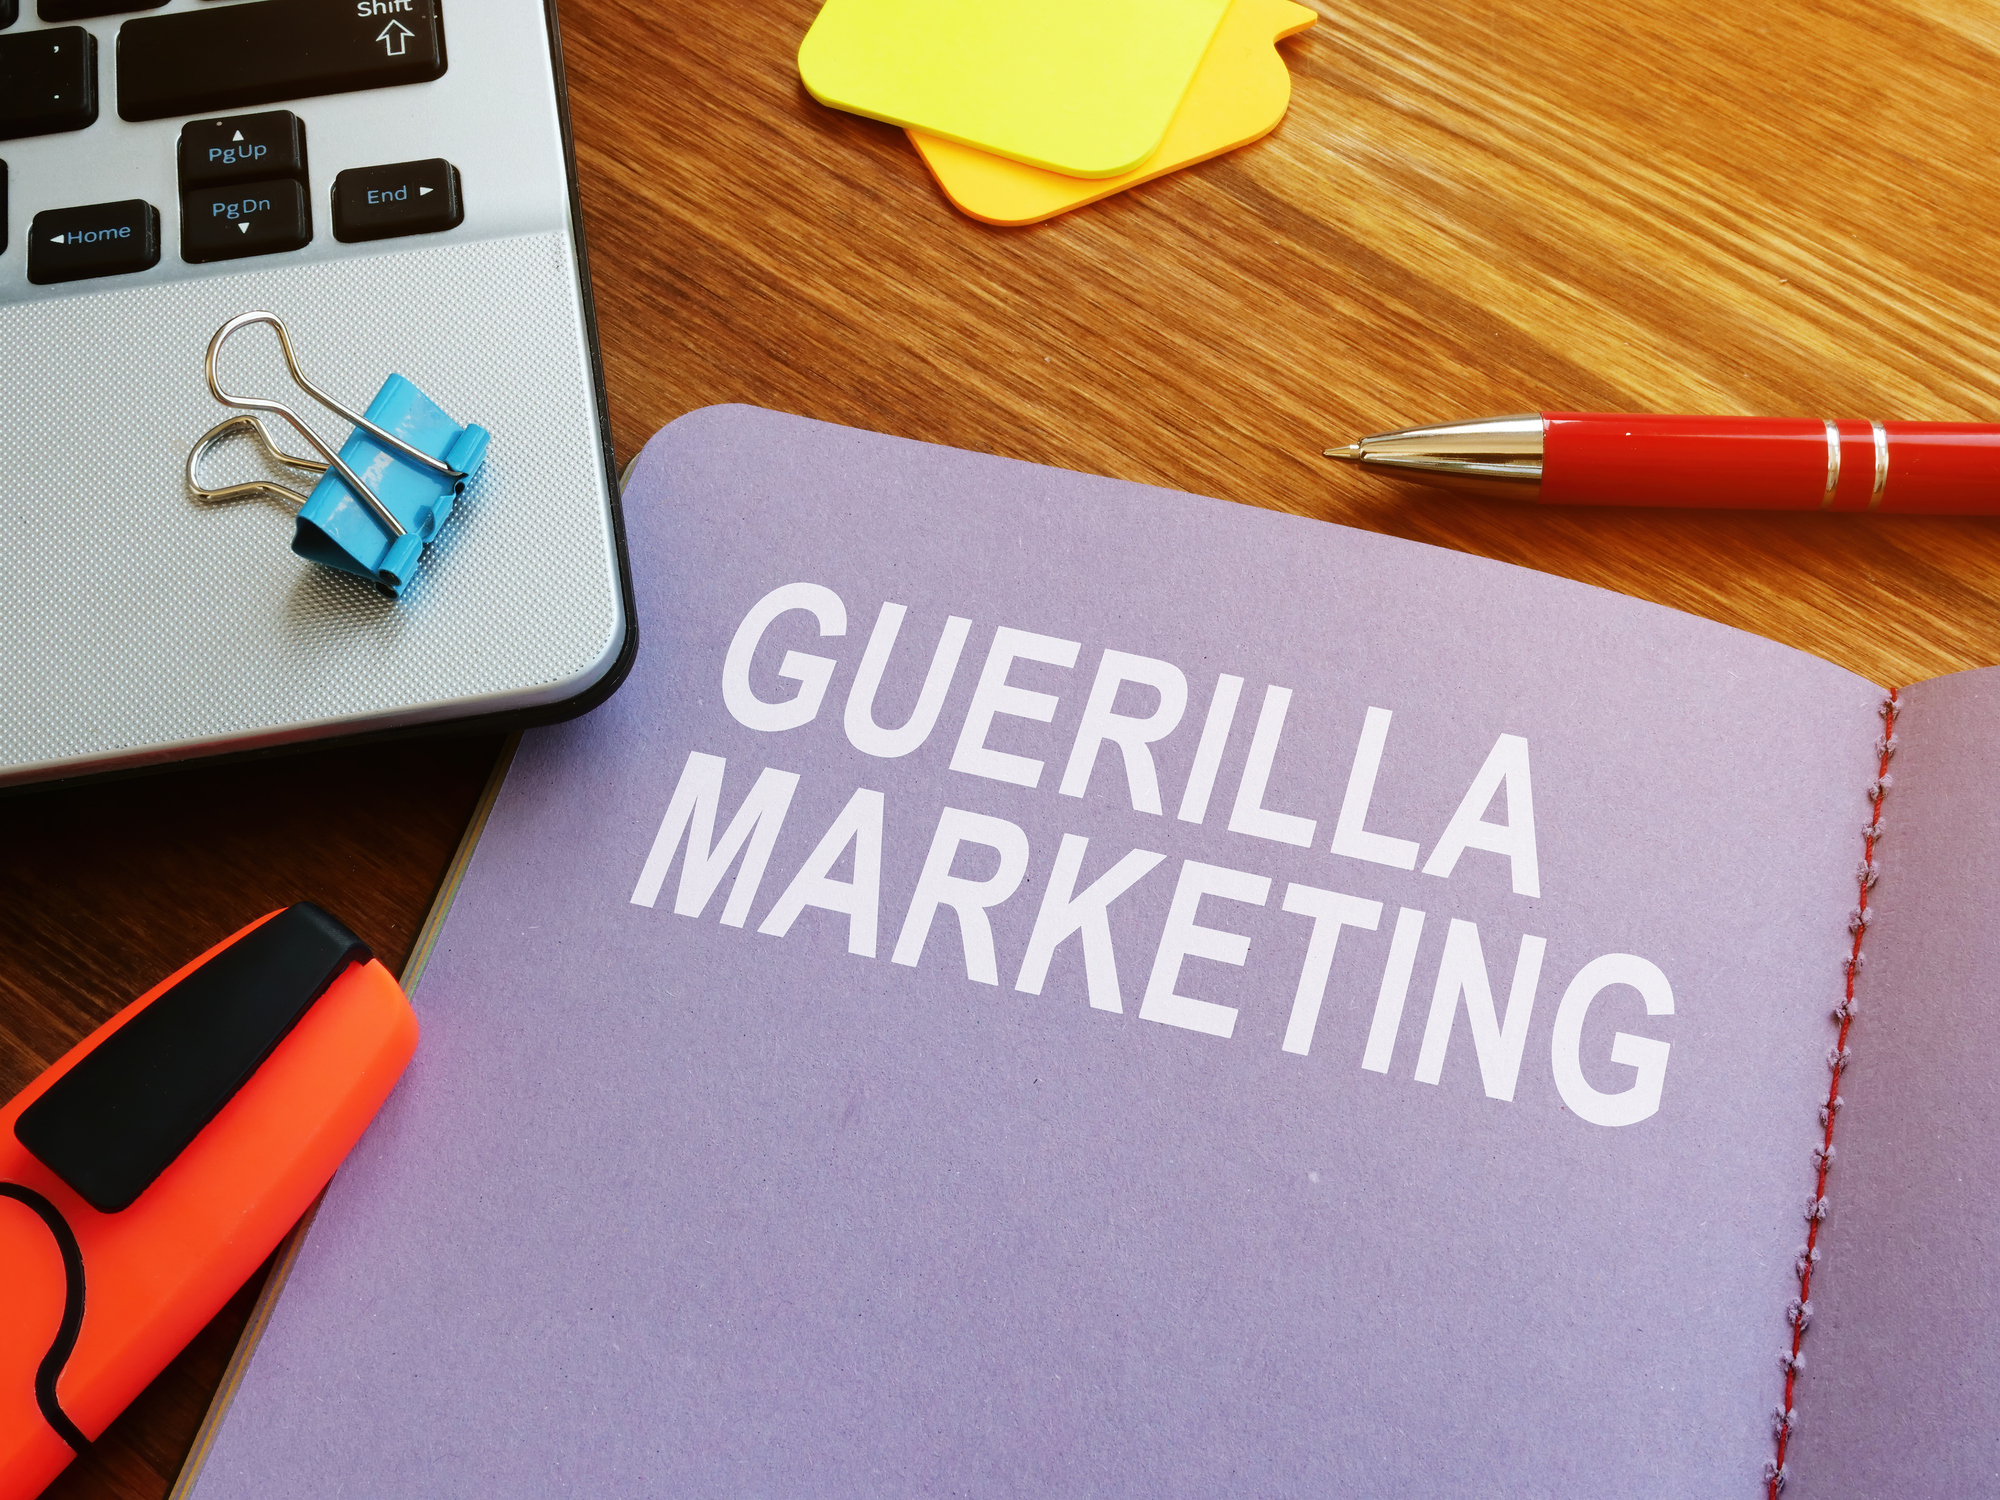 Read more about the article Guerrilla Marketing Tactics: A Guide for Entrepreneurs